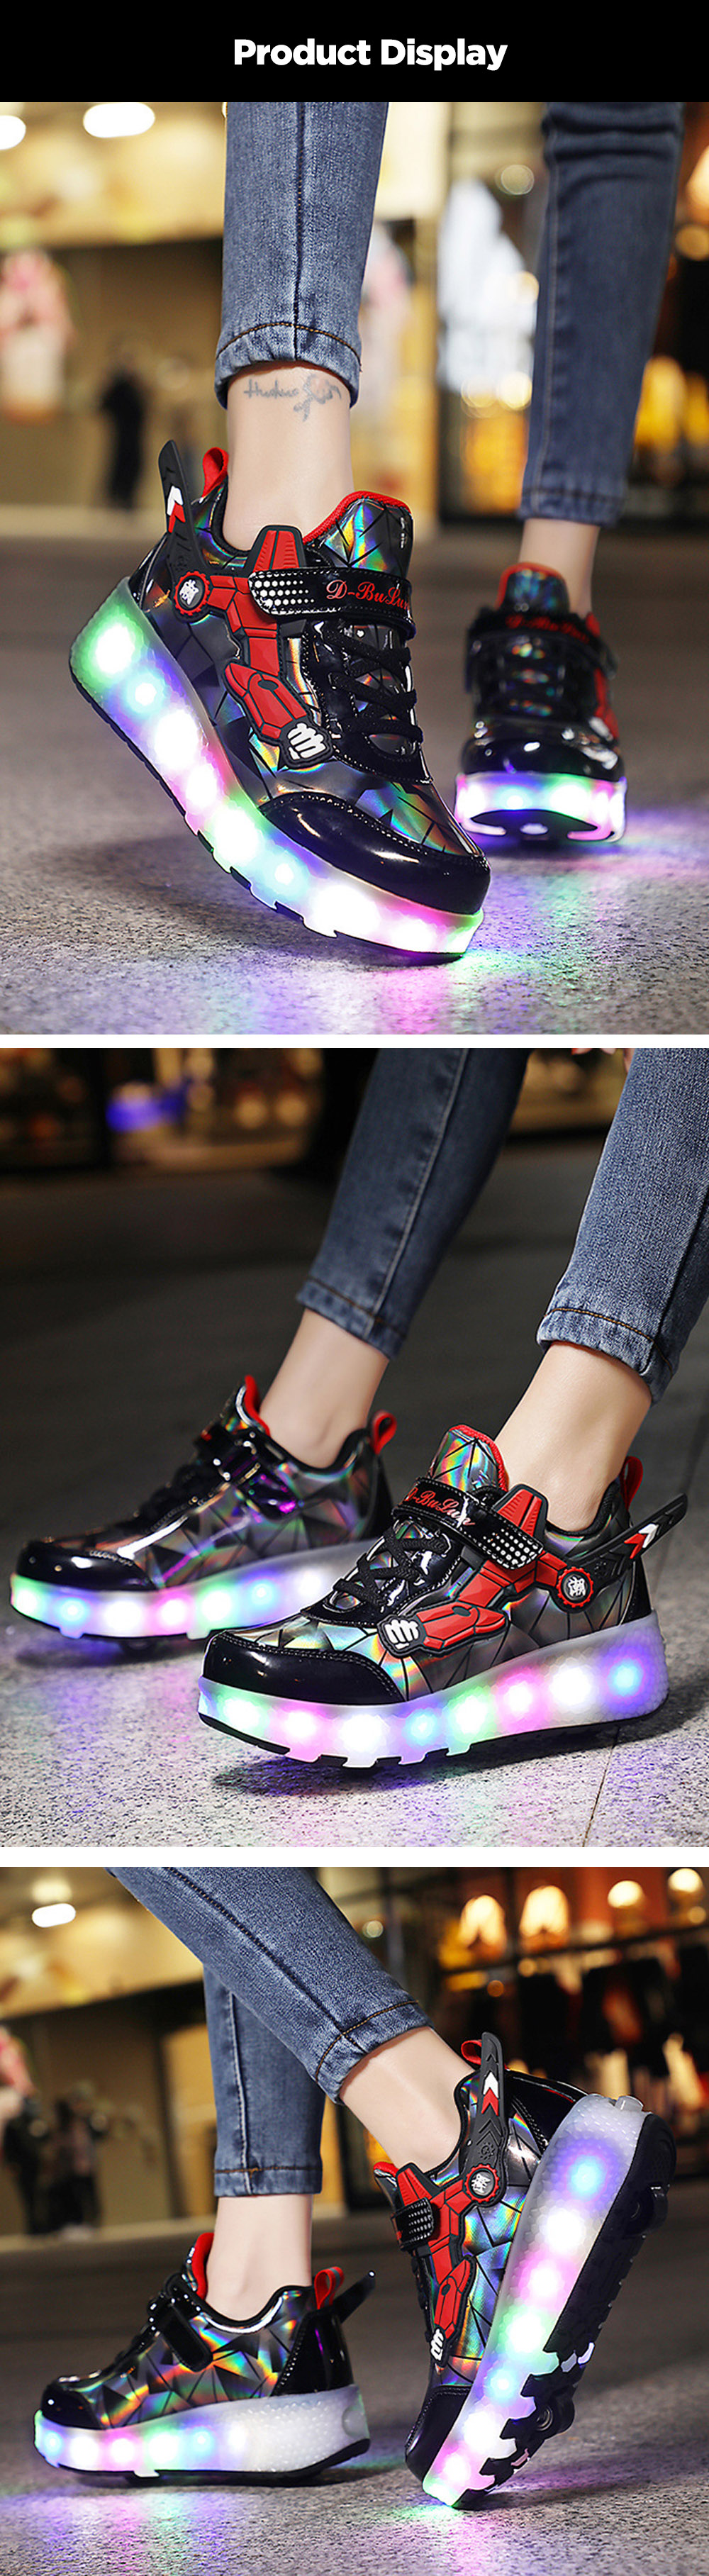 New-2-in-1-Skating-Shoes-USB-Rechargeable-Removed-LED-Wheels-Roller-Skate-Sport-Sneakers-1847956-4